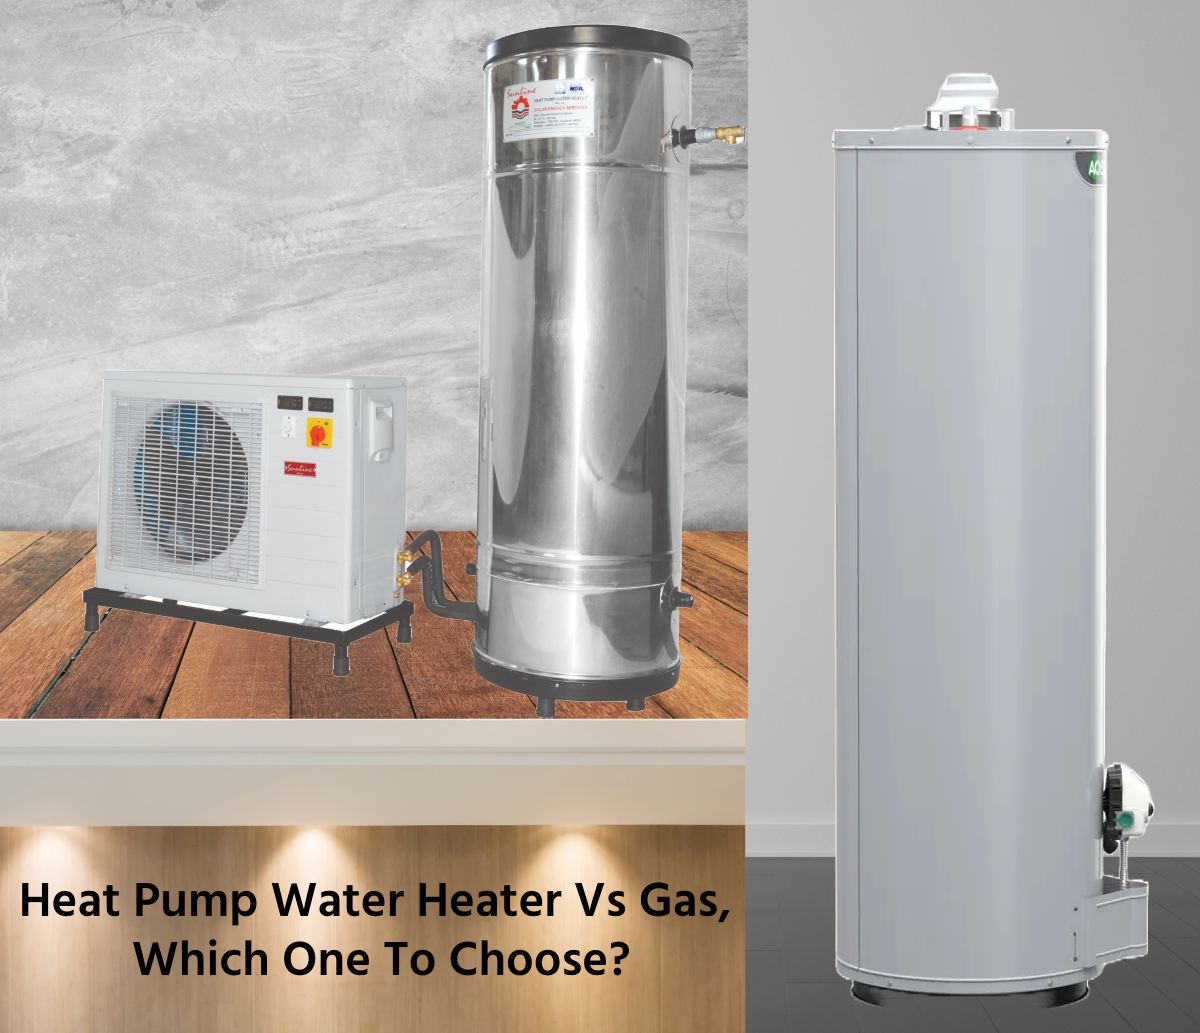 Heat Pump Water Heater Vs Gas, Which One To Choose